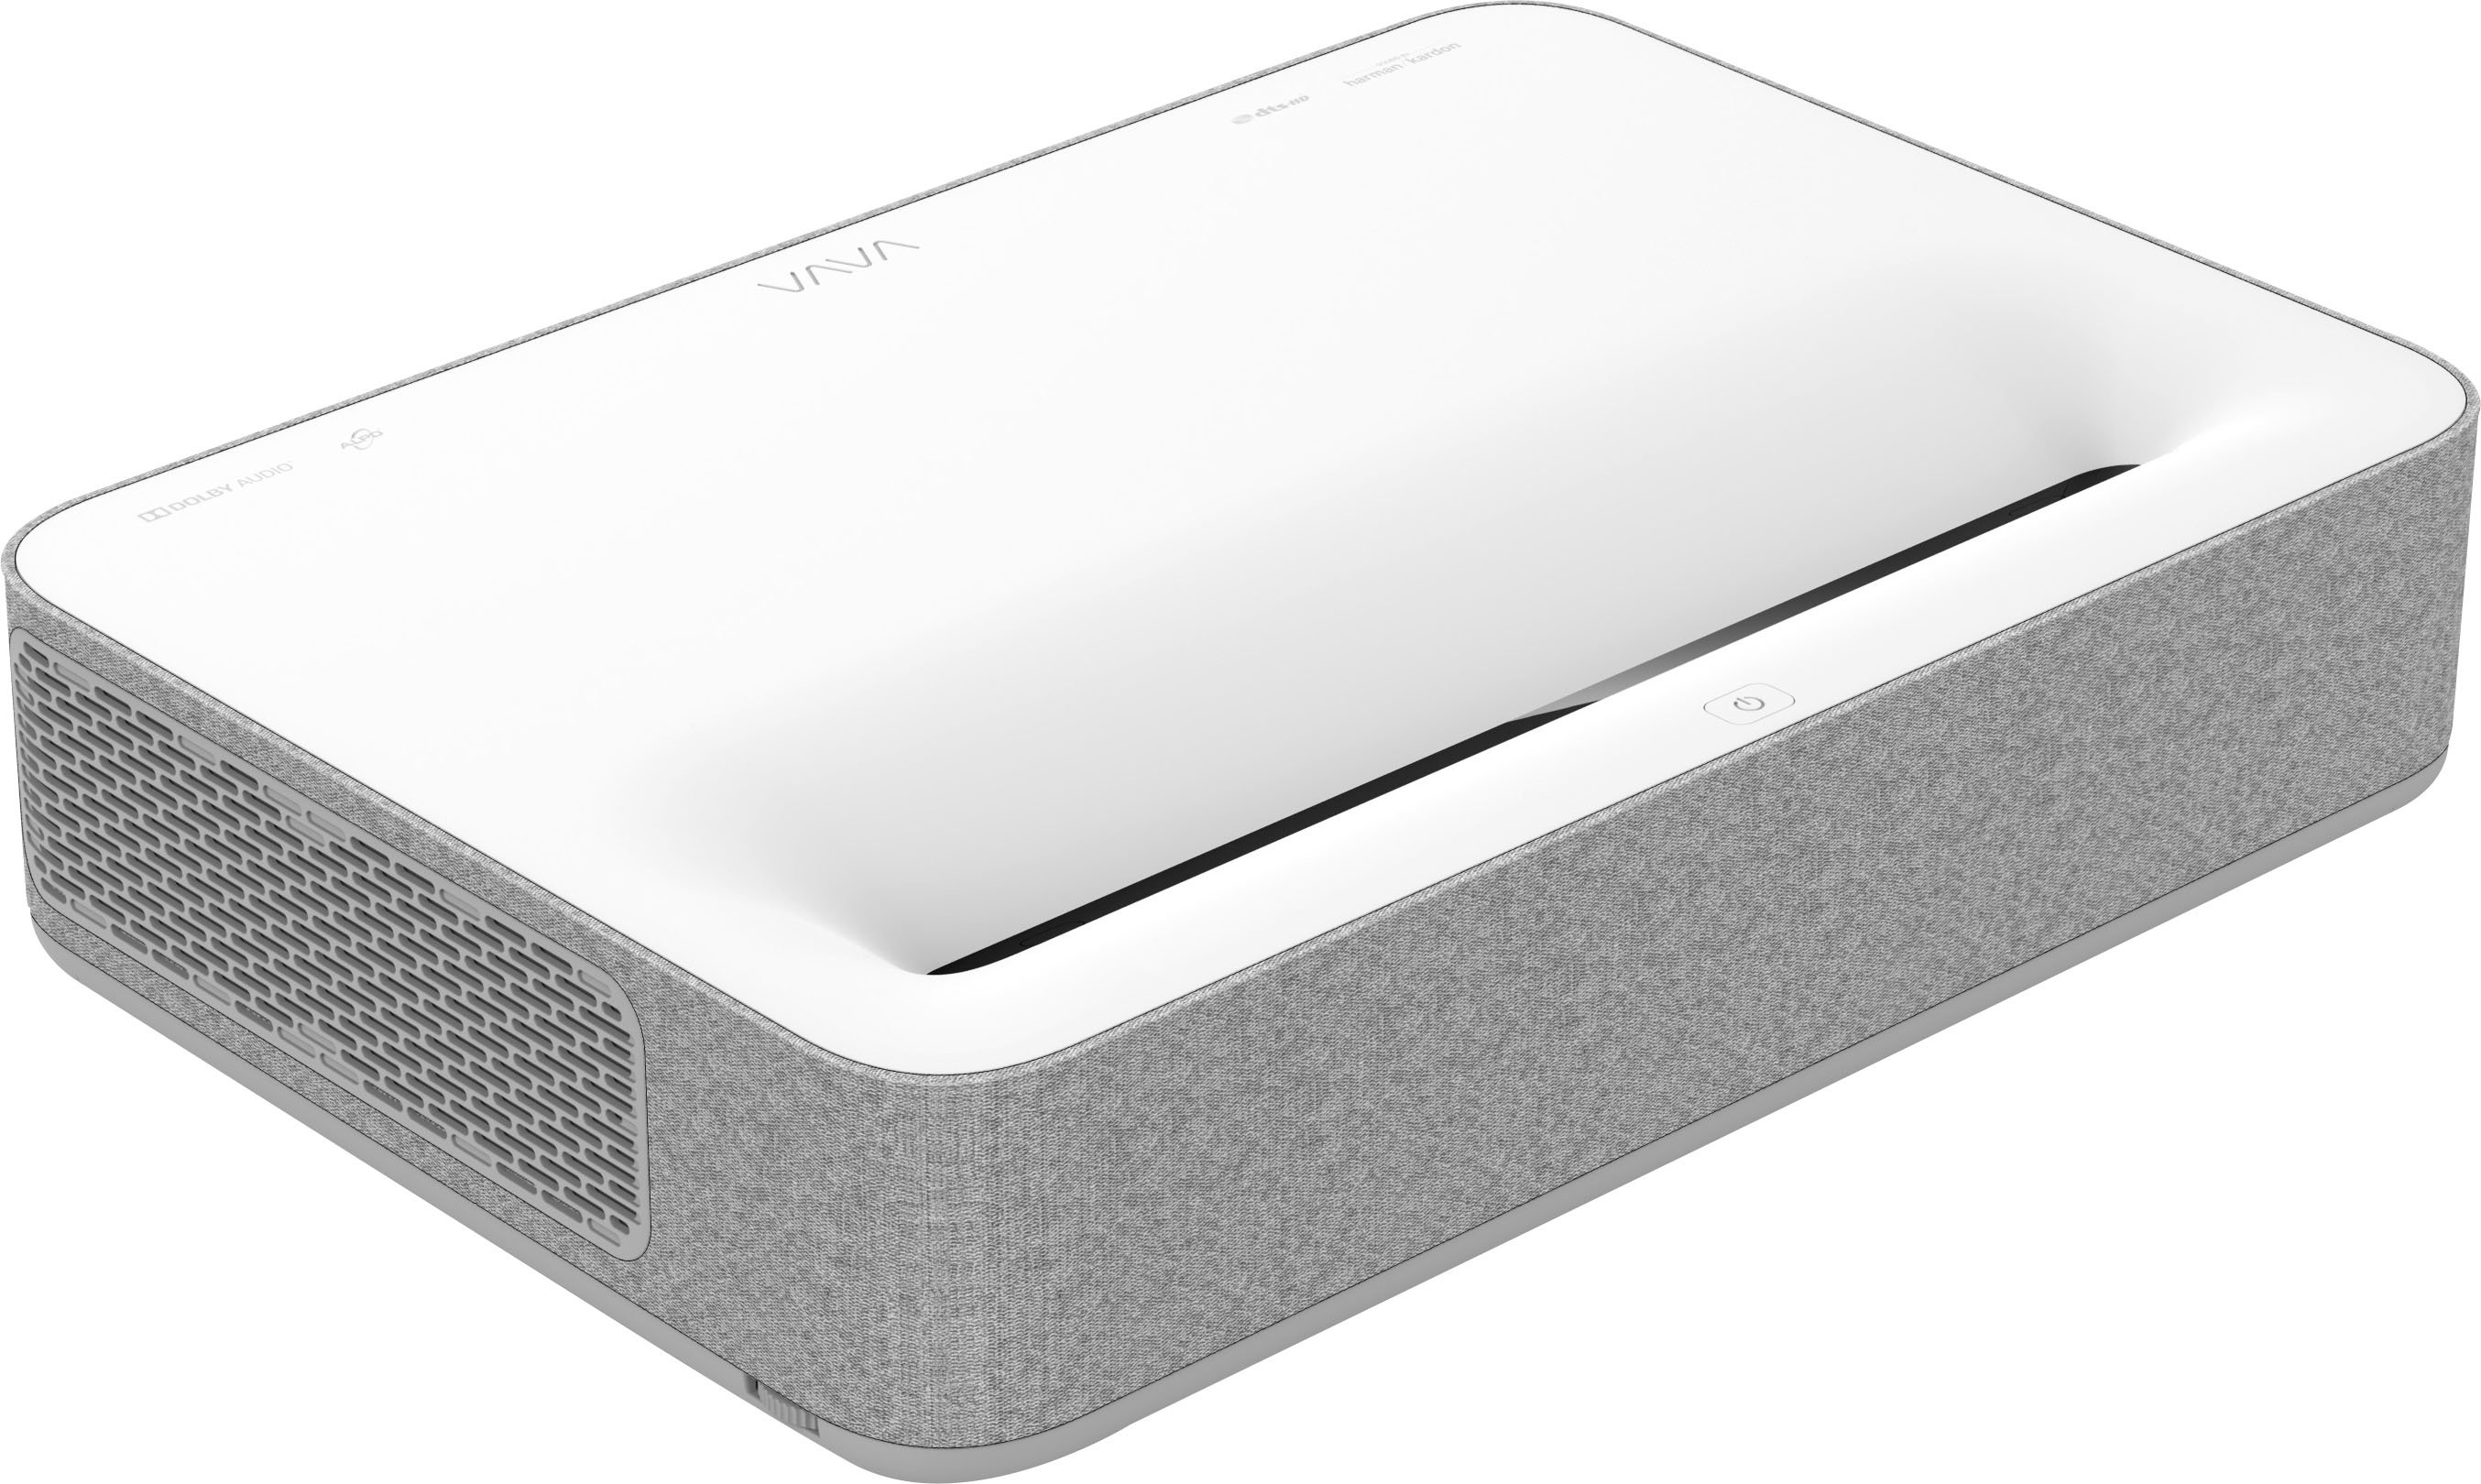 Angle View: VAVA - 4K via Upscaling UHD Smart Ultra Short Throw Laser TV Home Theater Projector - White/Gray